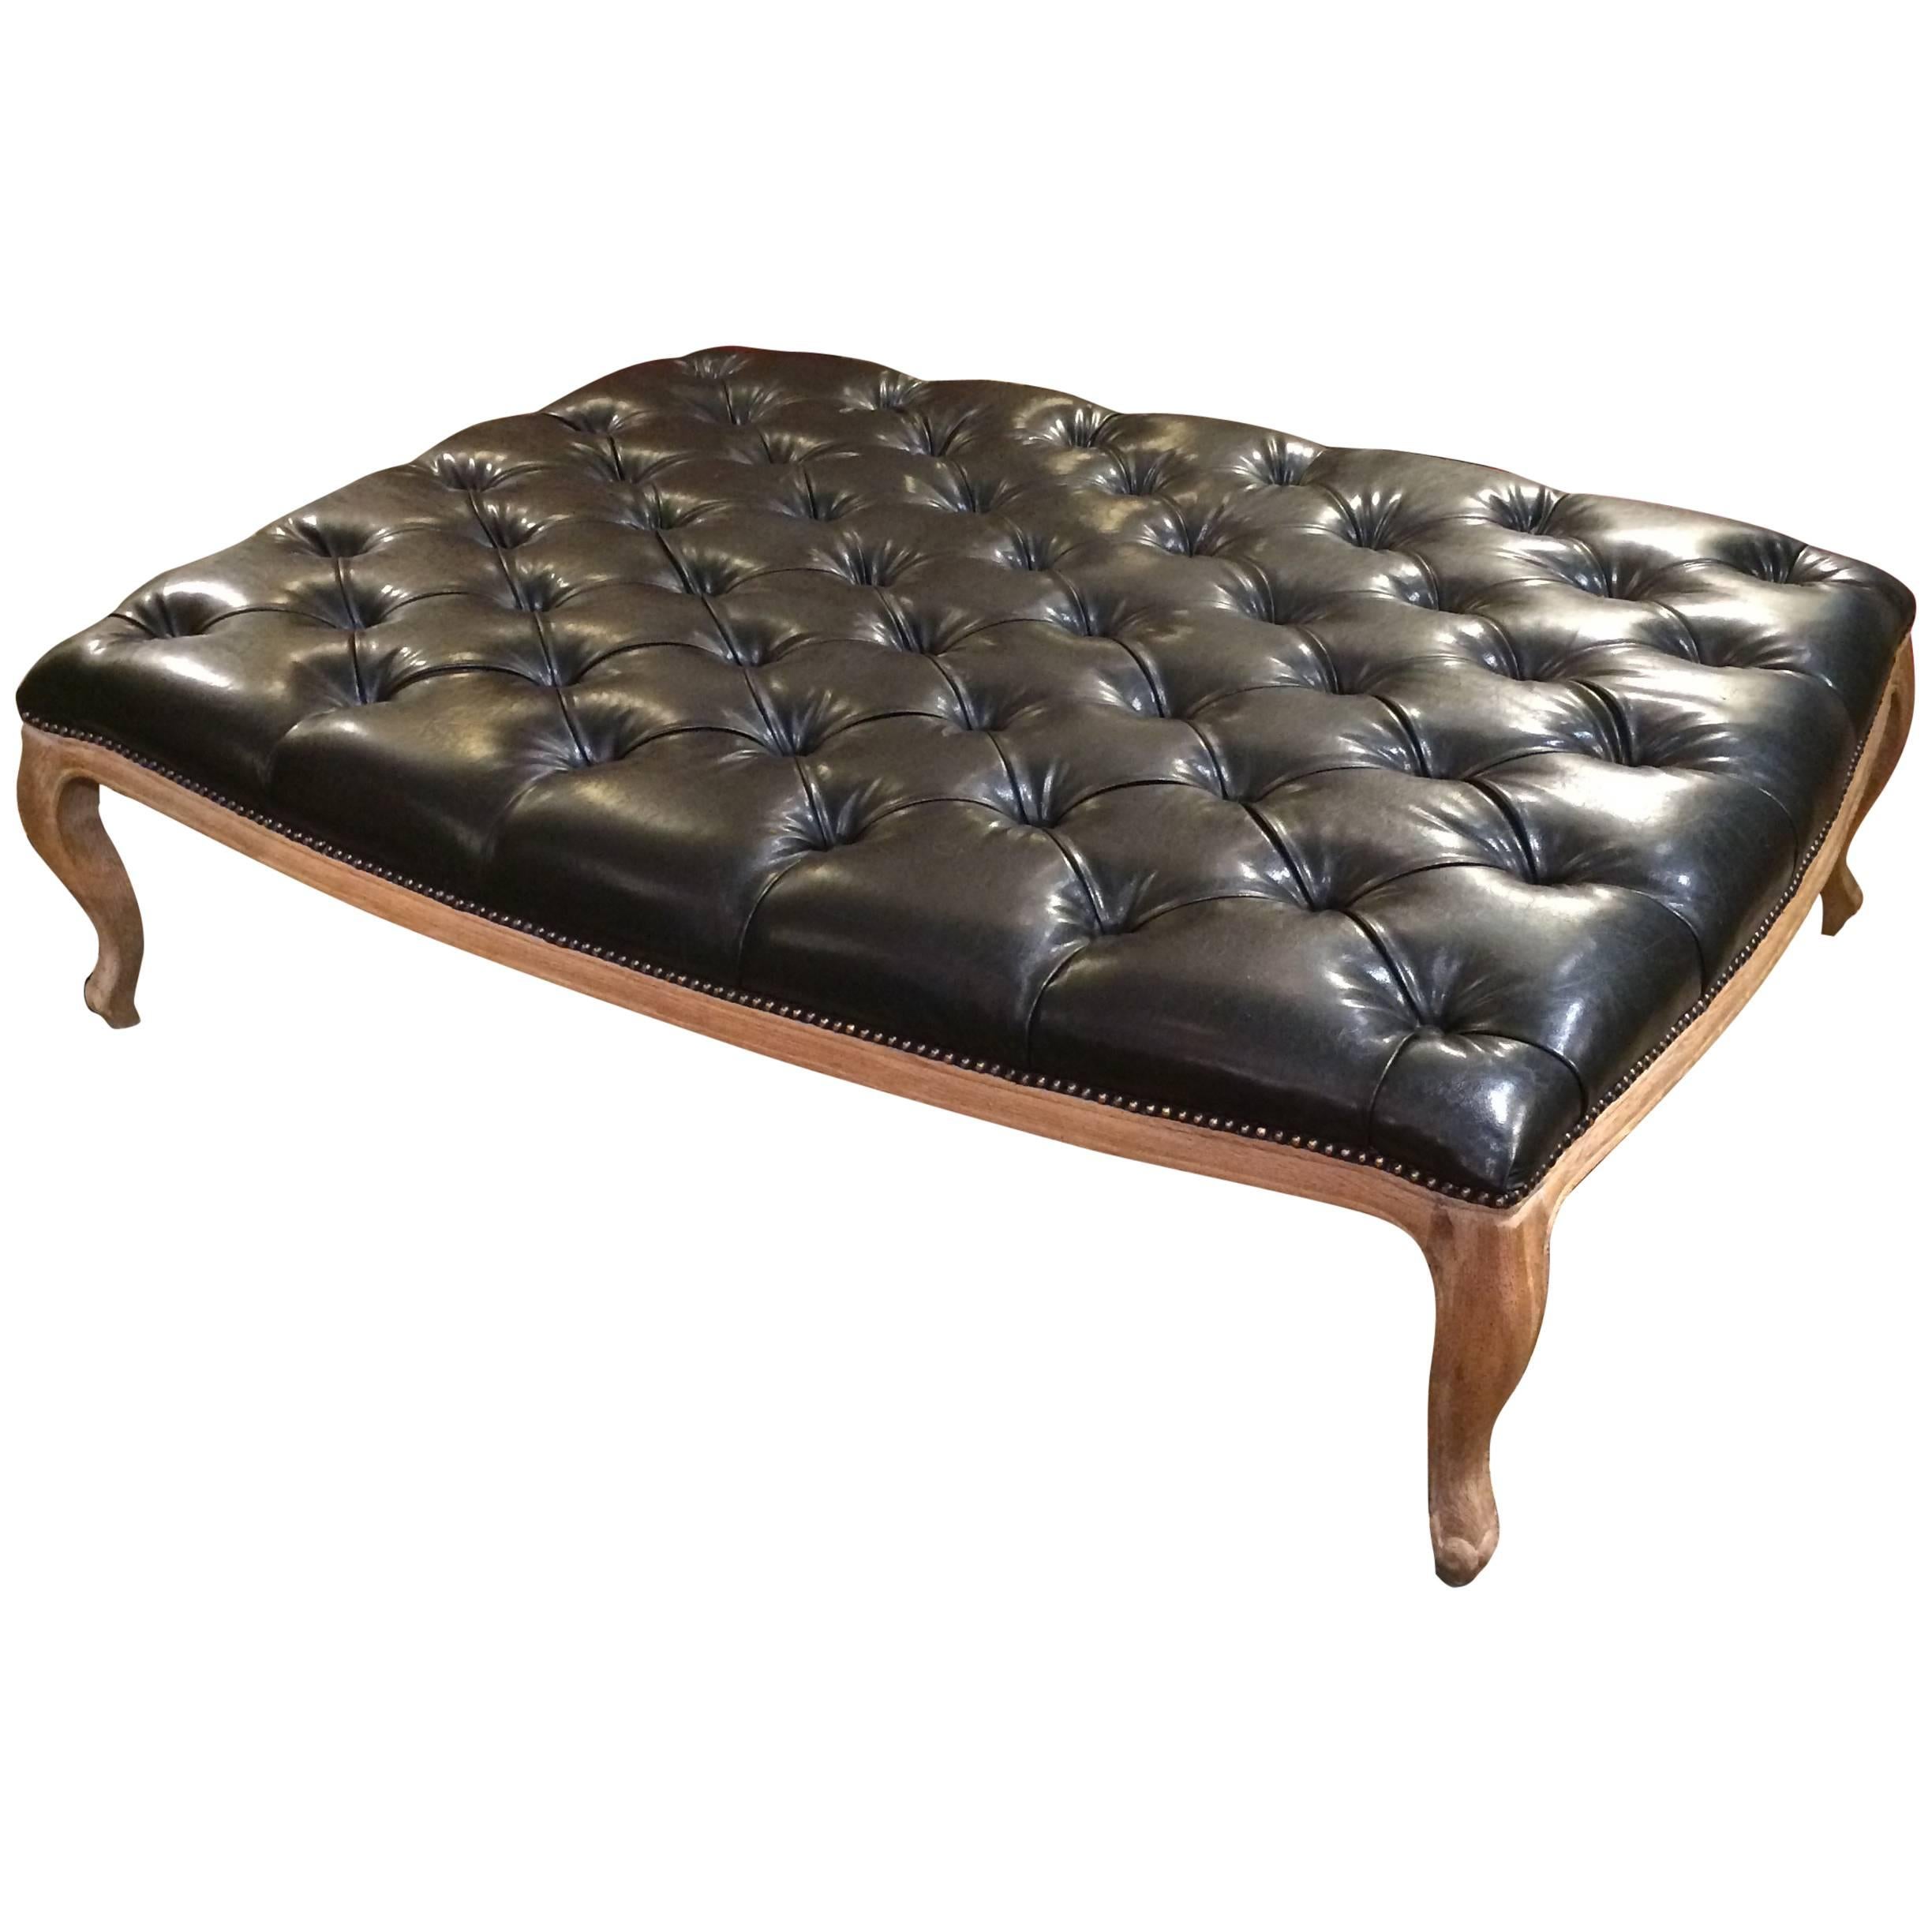 Very Large Button Tufted Black Faux Leather Ottoman Coffee Table